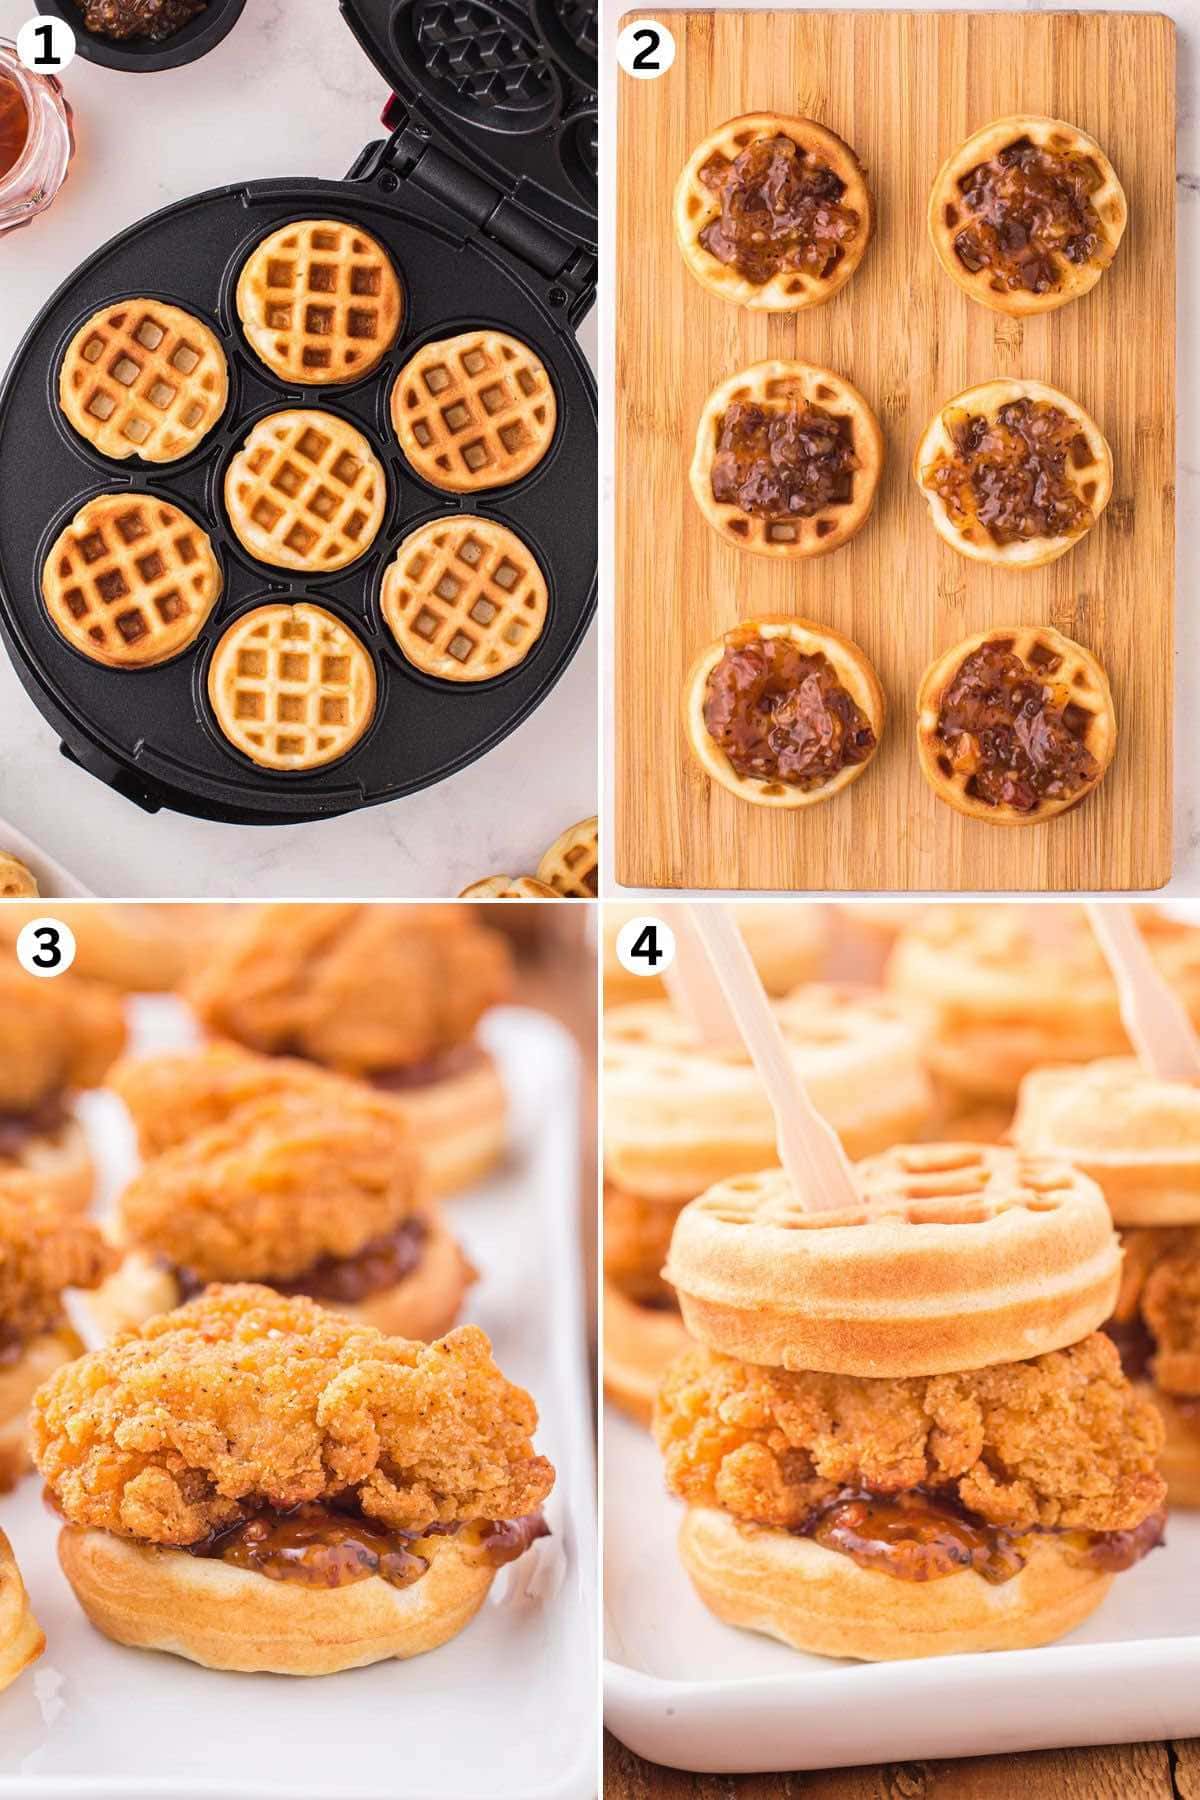 Cook the waffles until golden brown. Spread a teaspoon of bacon jam over mini waffles. Place a heated chicken wing on top of the jam. Top with another plain mini-waffle and secure with a toothpick.